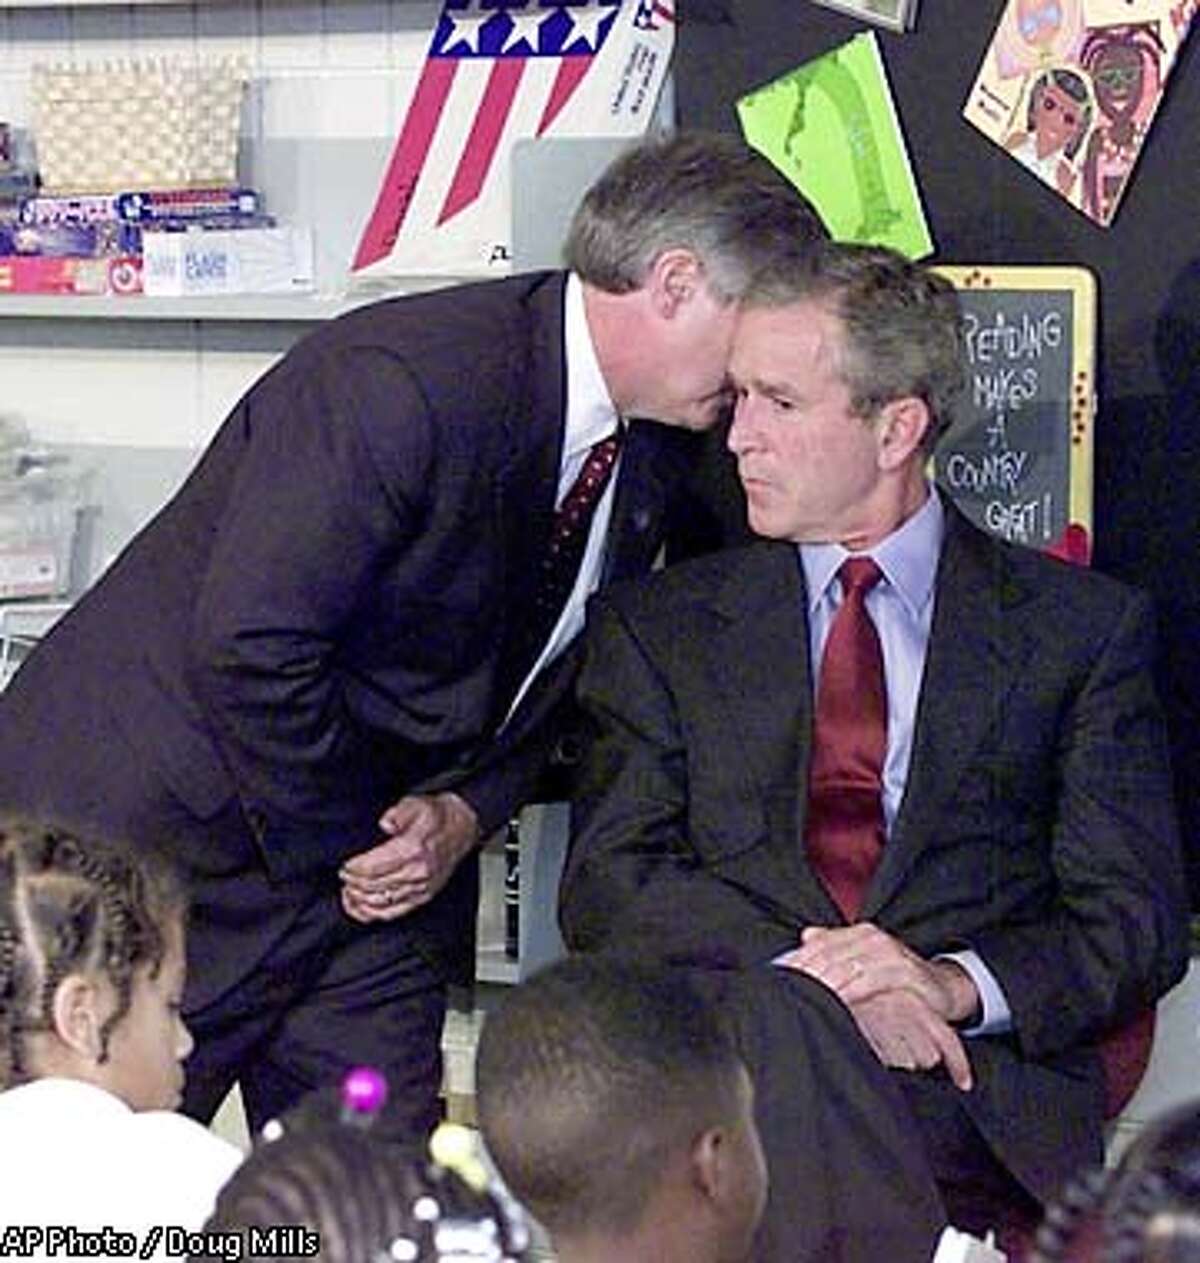 President Bush's Chief of Staff Andy Card whispers into the ear of the President to give him word of the plane crashes into the World Trade Center, during a visit to the Emma E. Booker Elementary School in Sarasota, Fla., Tuesday, Sept. 11, 2001. (AP Photo/Doug Mills) .. ALSO RAN 09/23/2001, SPECIAL SECTION